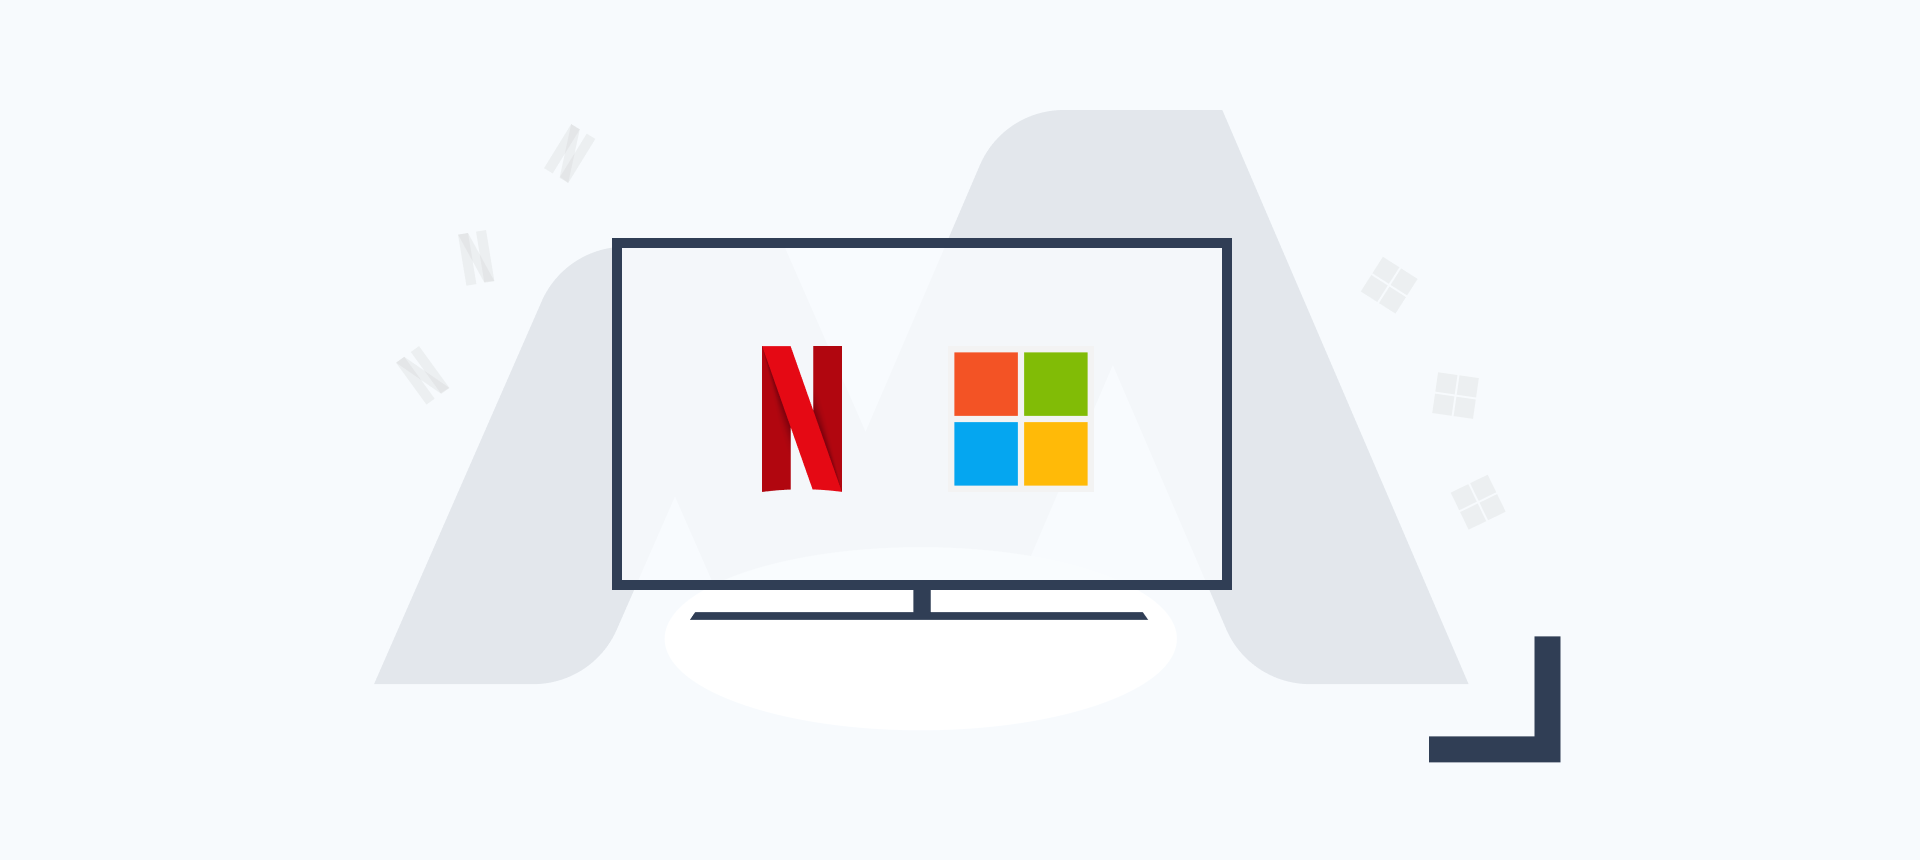 Microsoft wins race to advertise on Netflix, beating both Google and Comcast